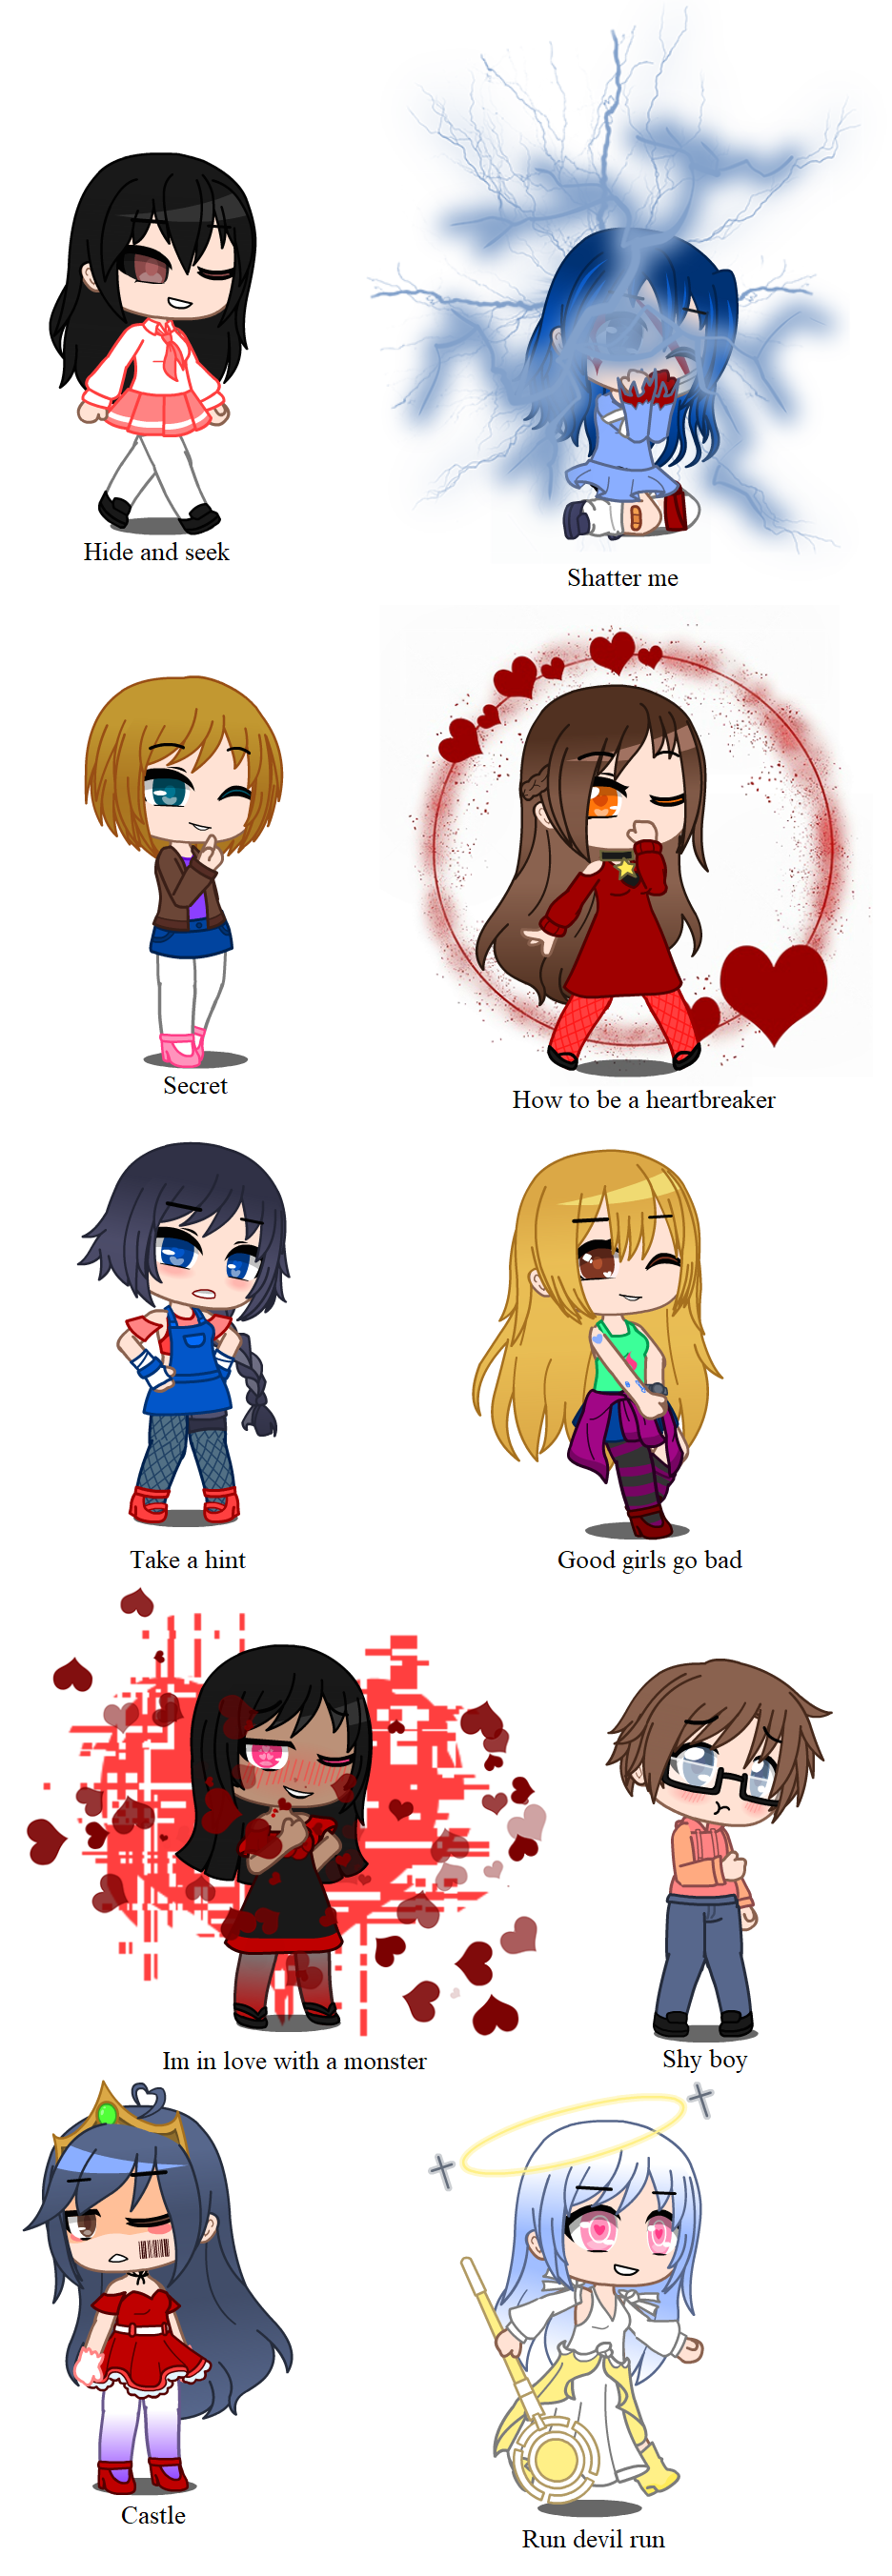 made some characters in Gacha Plus mod (1of2) by hoalyden on DeviantArt